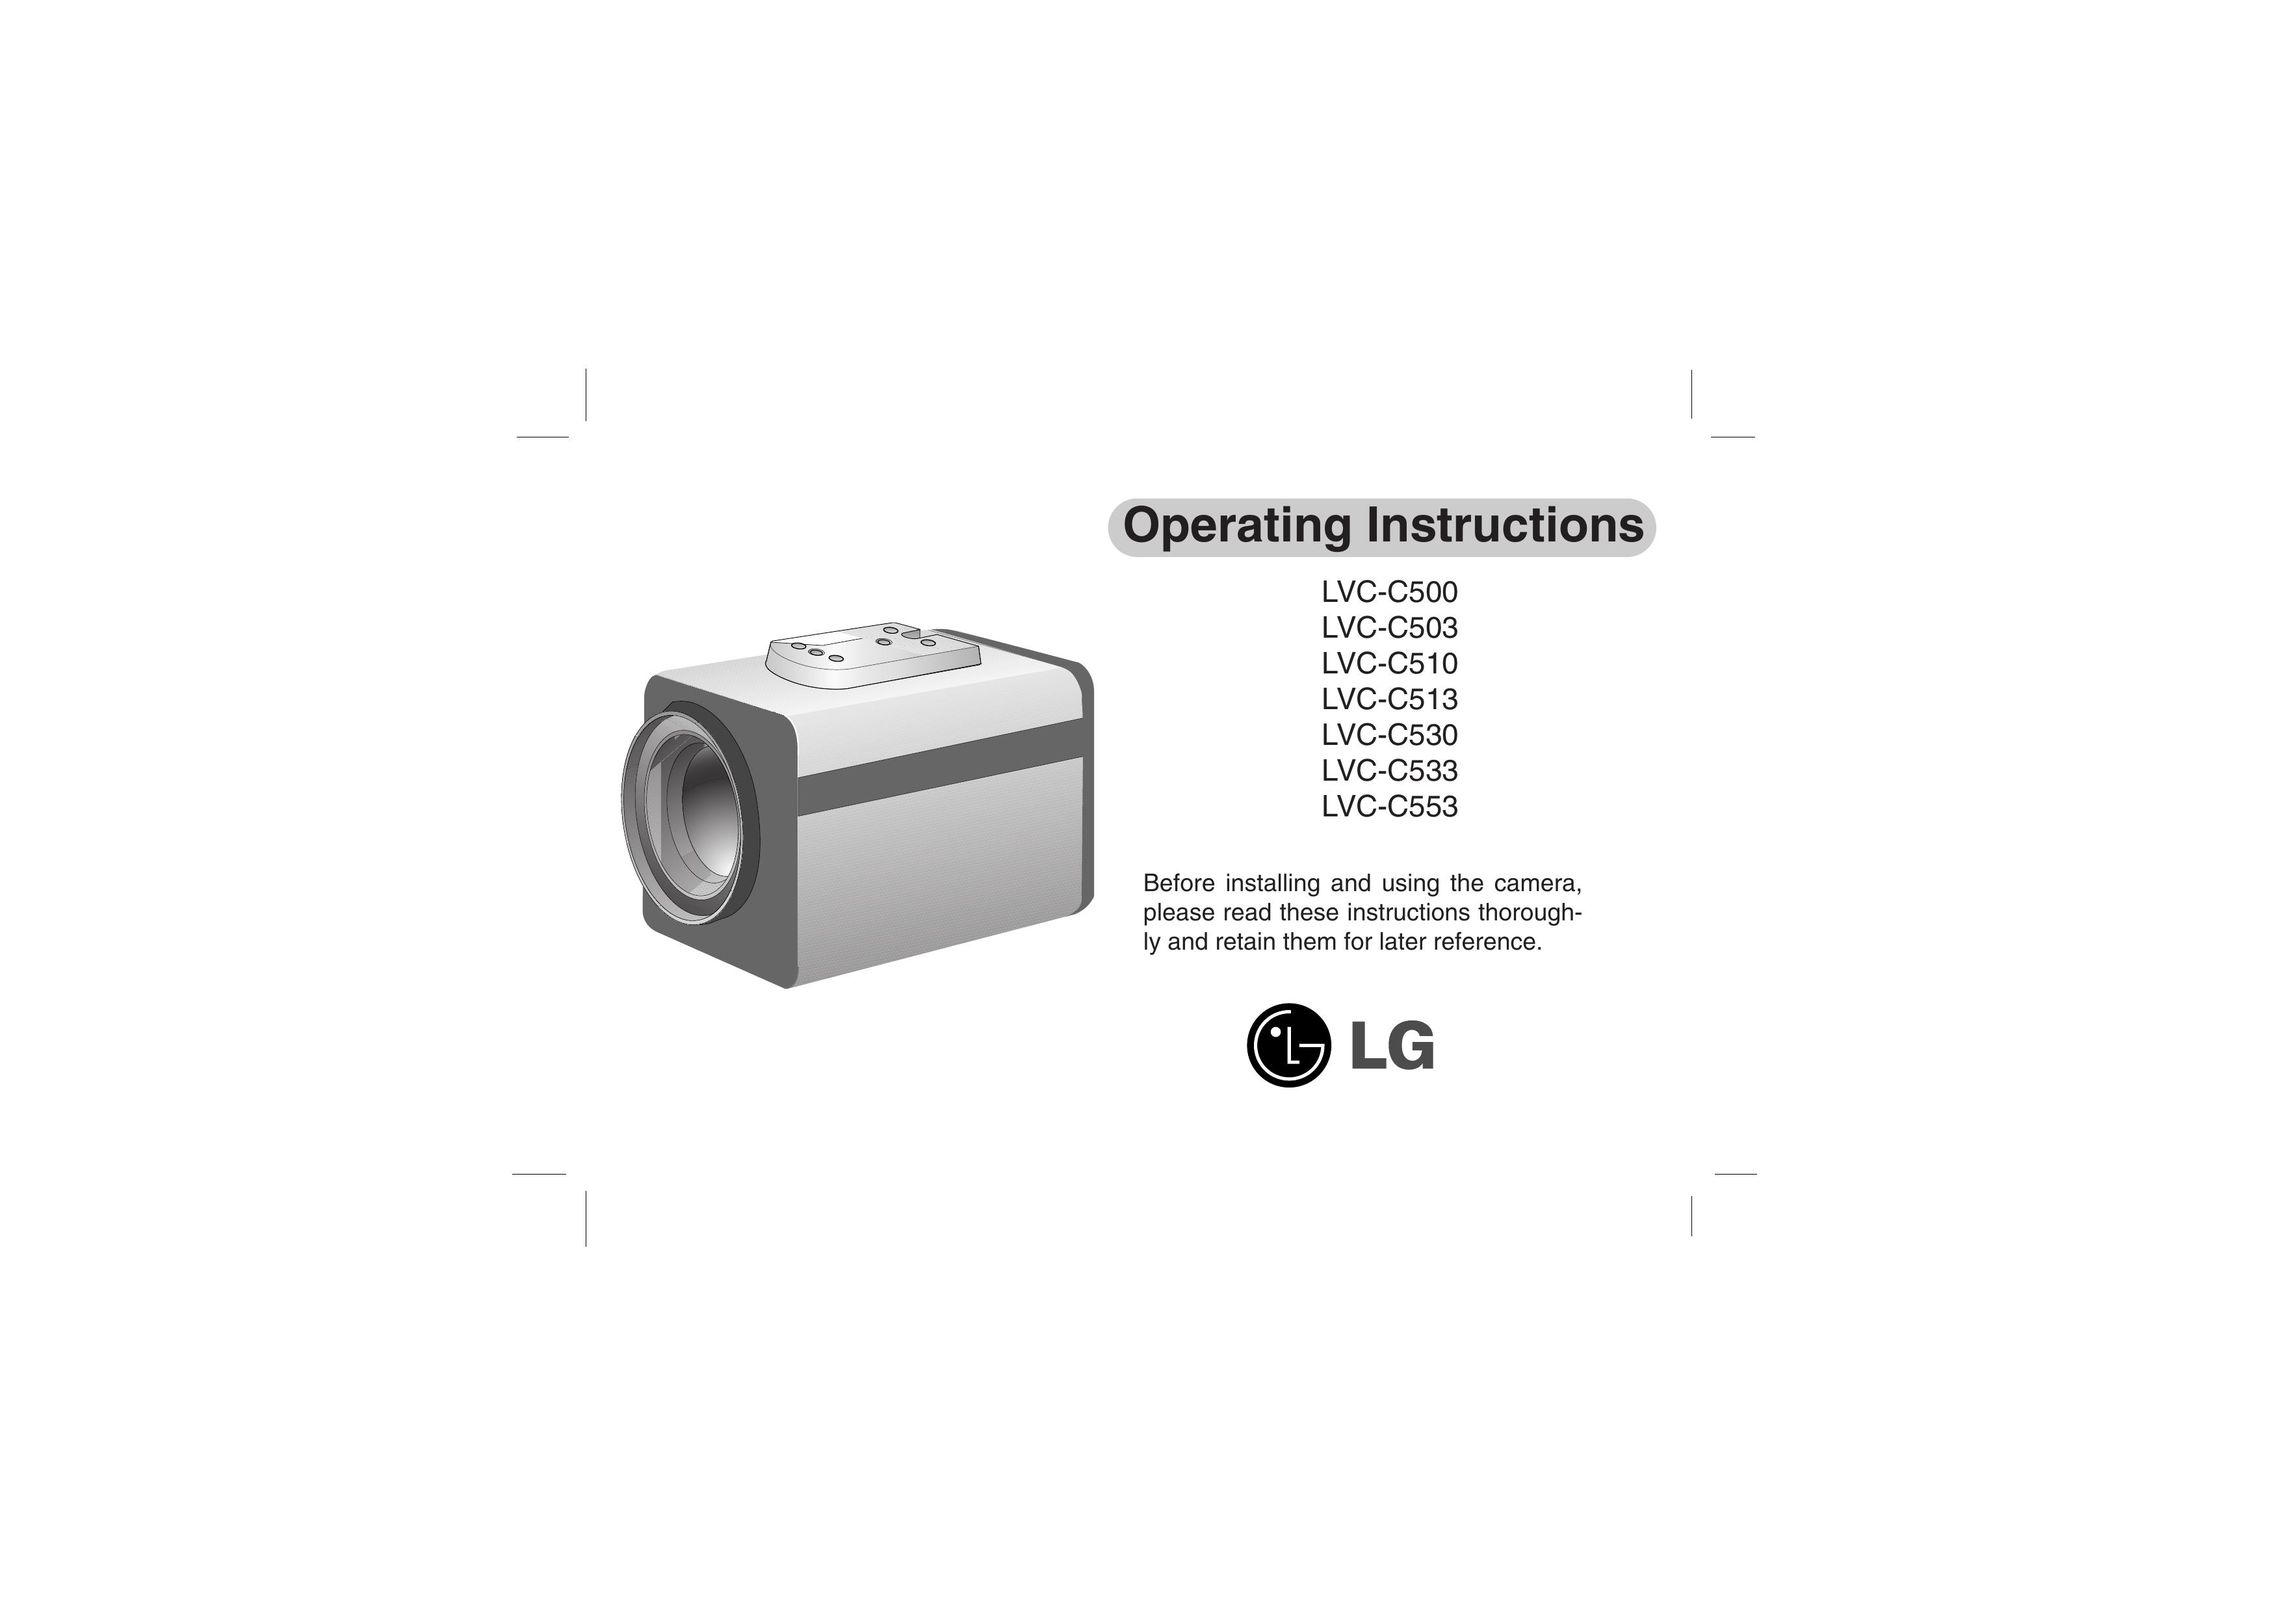 LG Electronics LVC-C500 Home Security System User Manual